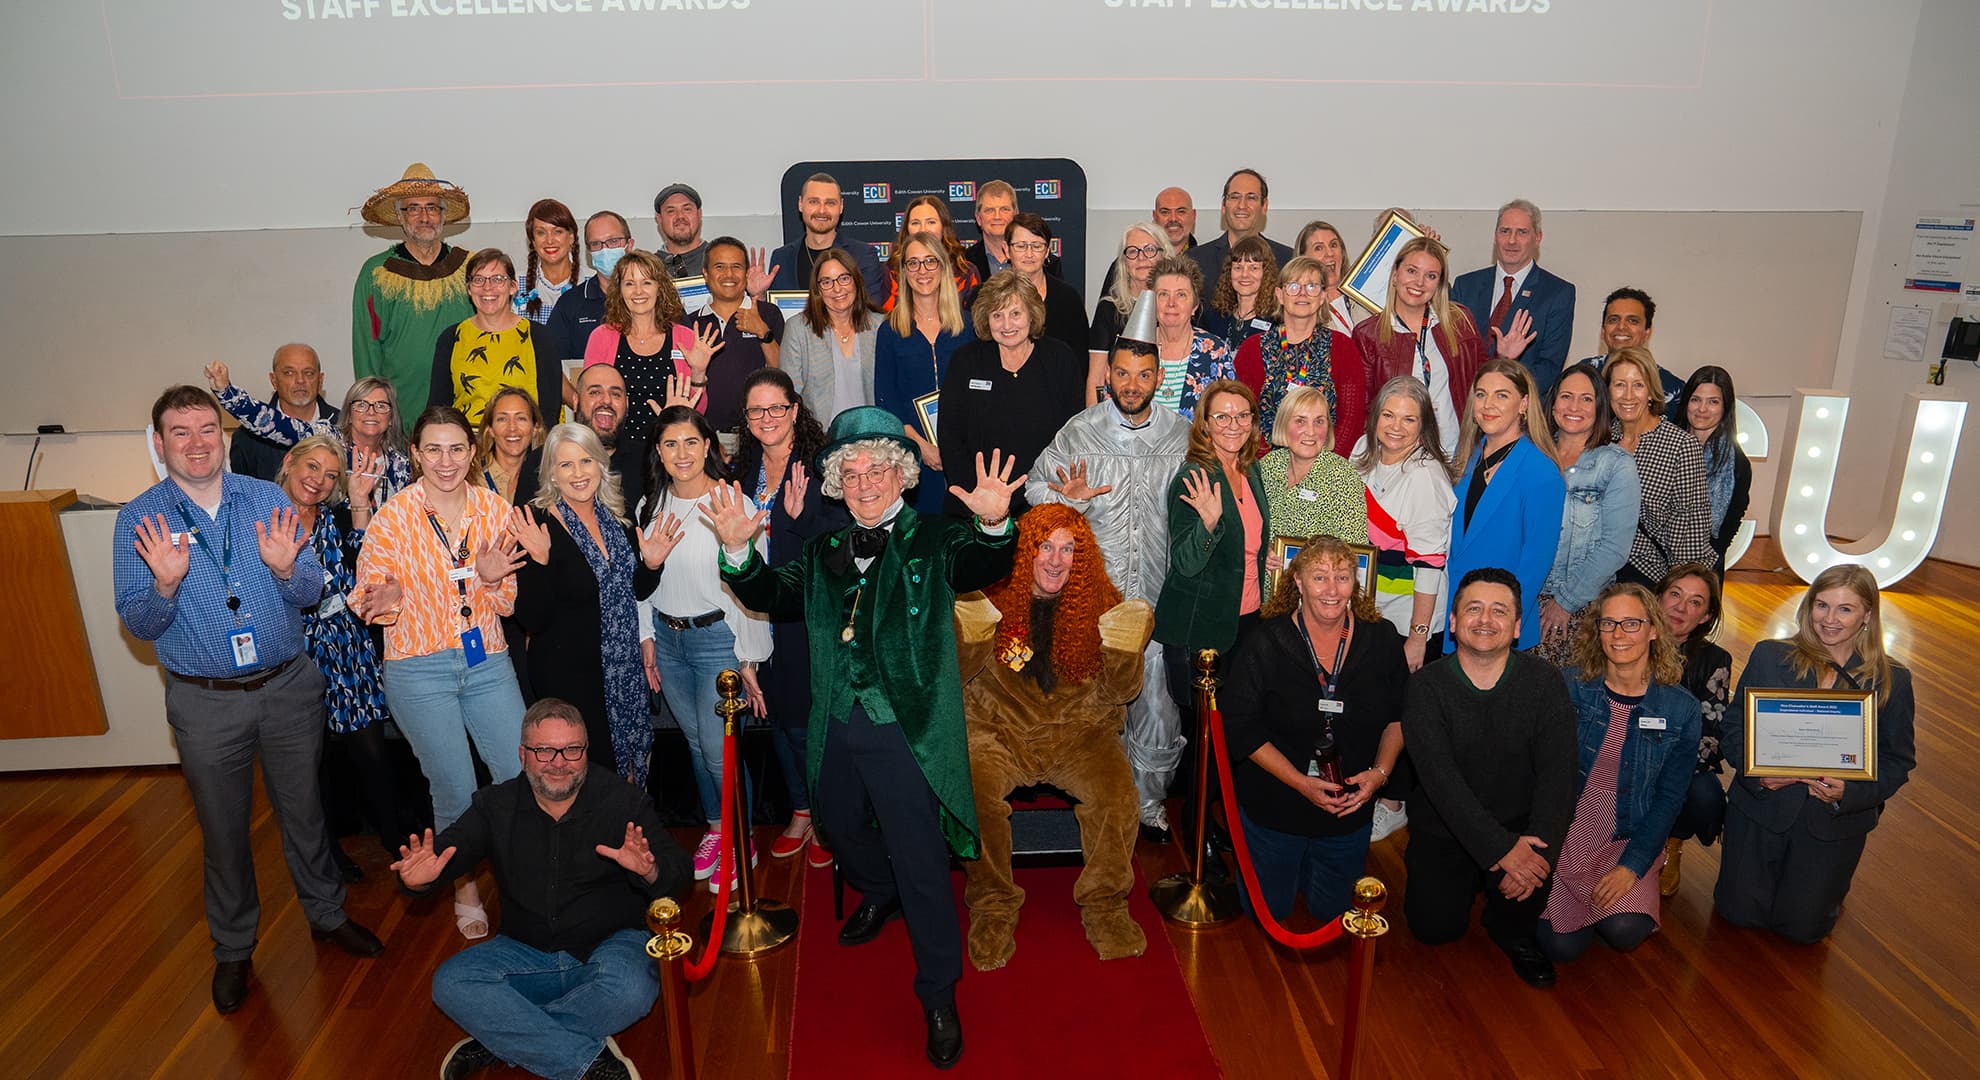 Edith Cowan University’s Vice-Chancellor’s Staff Excellence Awards 2022 group photo of winners